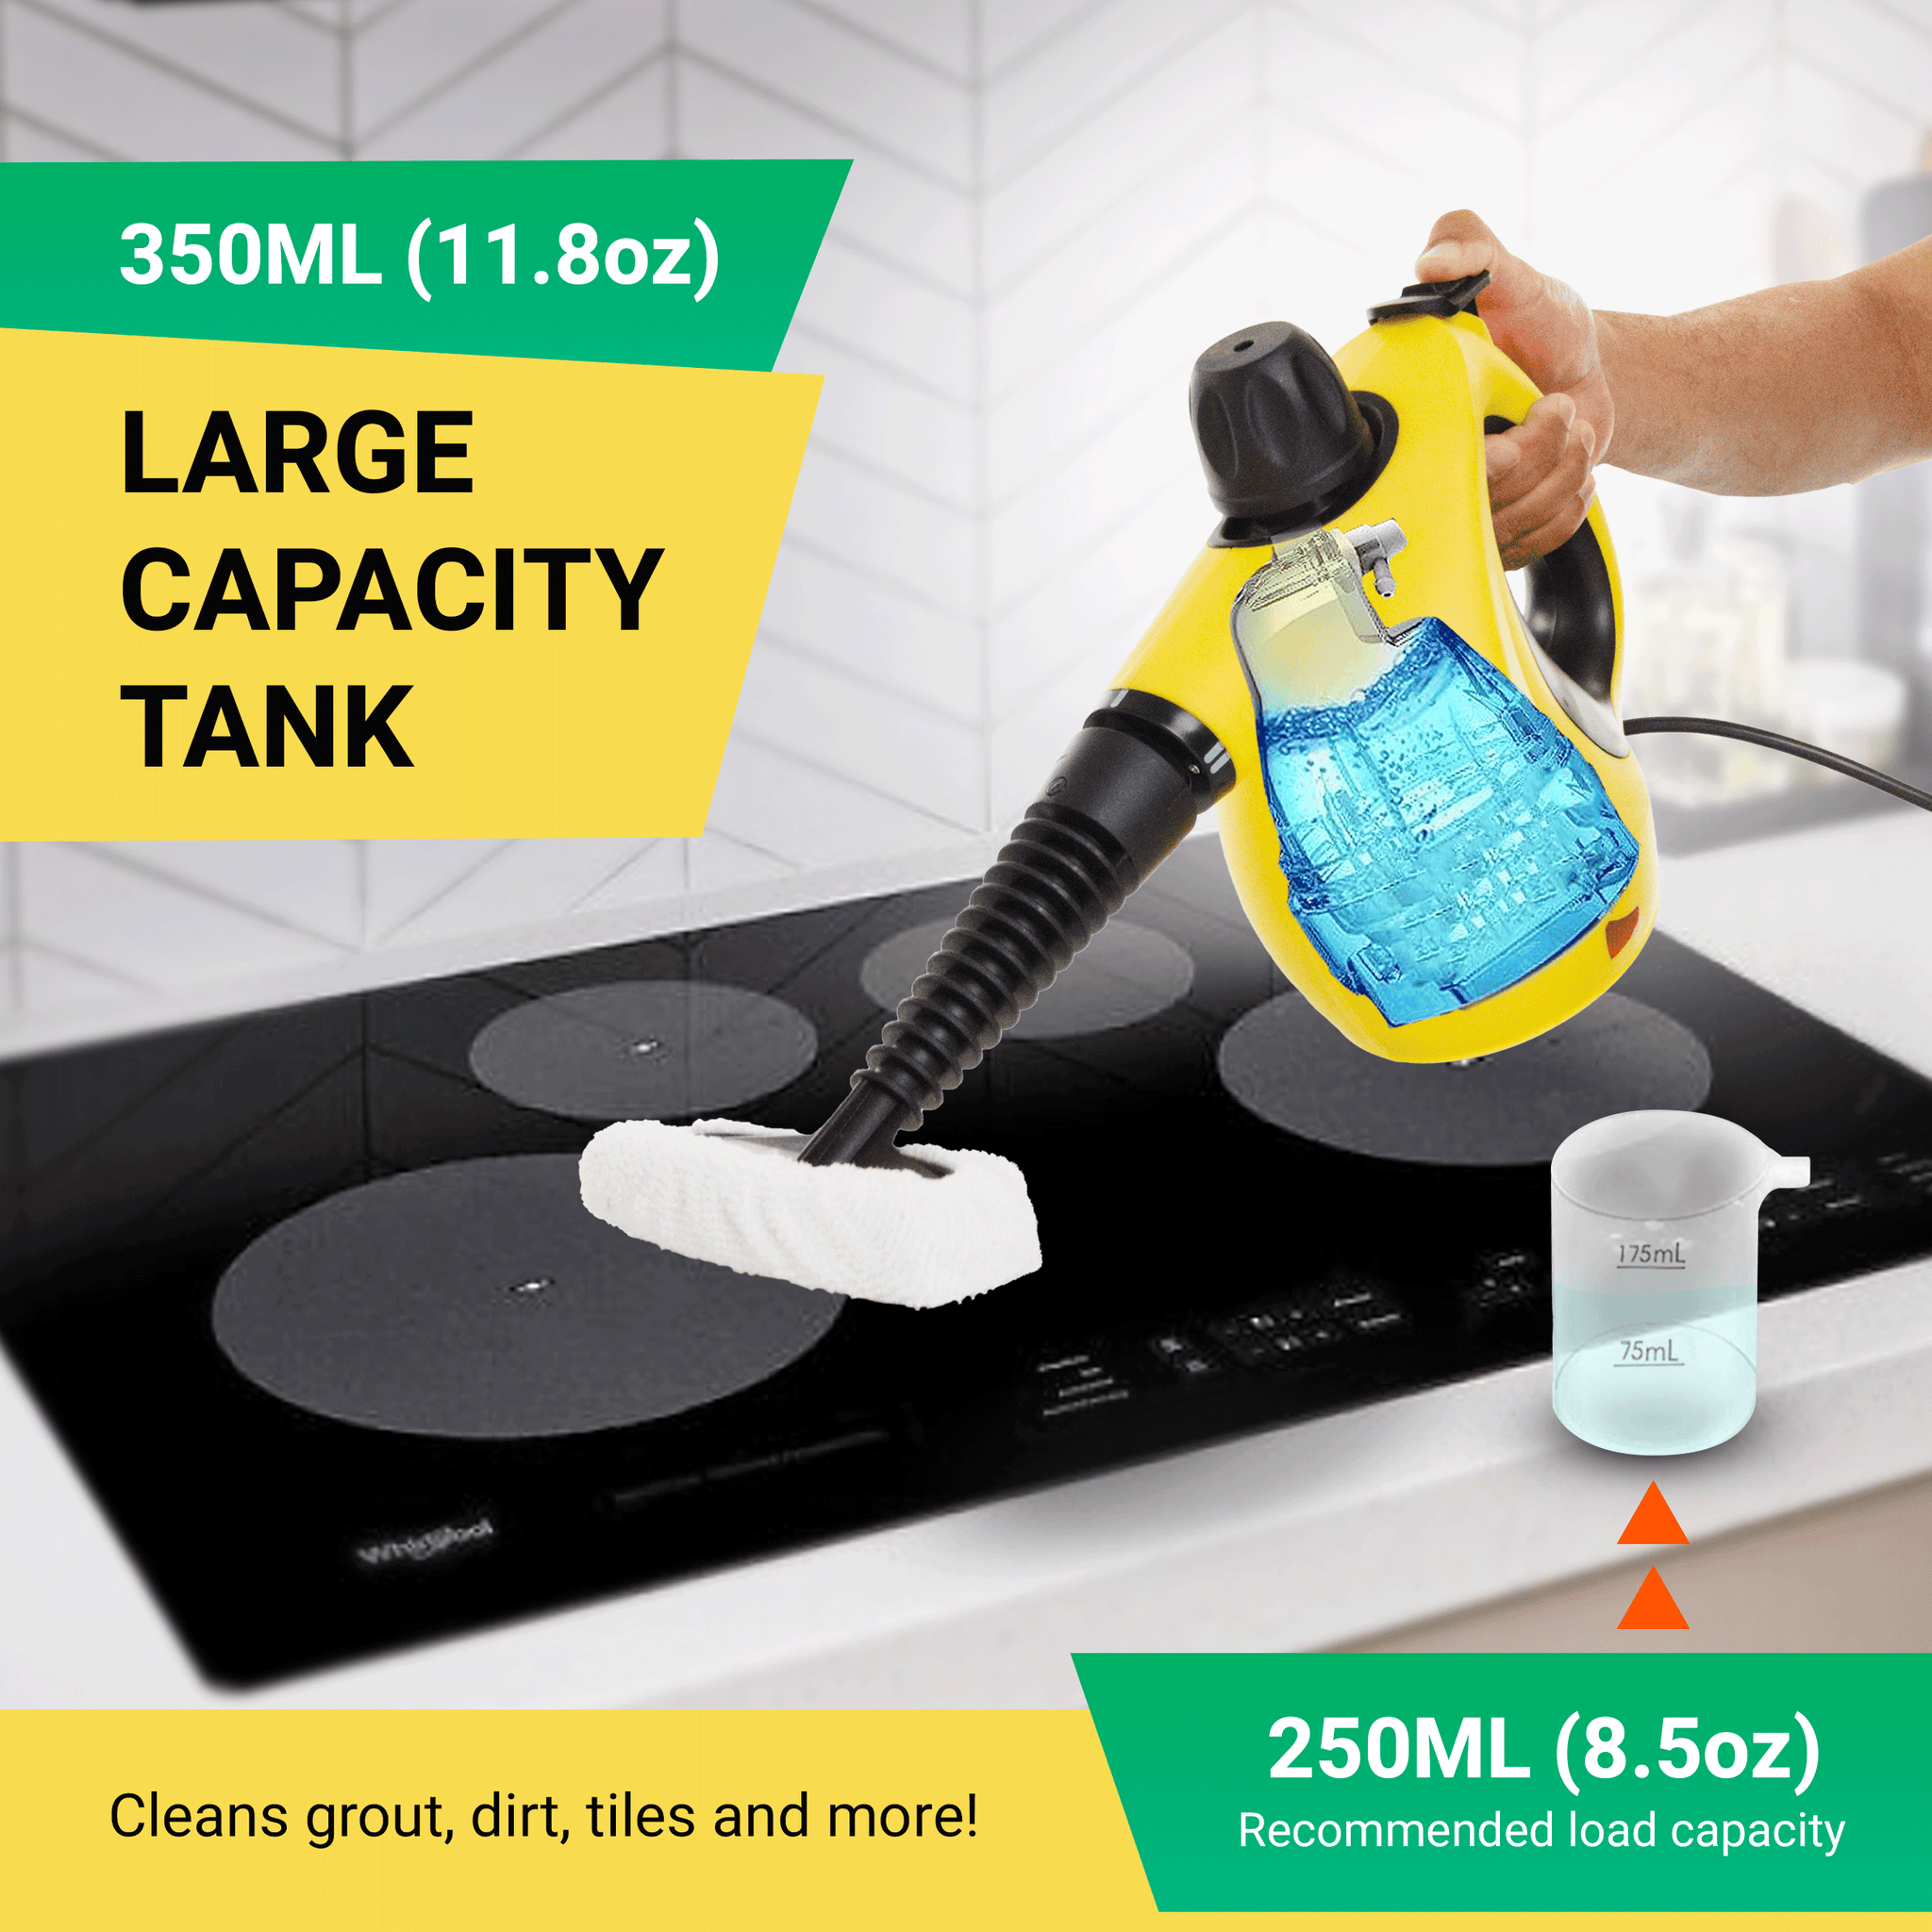 (Refurbished) Comforday Multi-Purpose Handheld Pressurized Steam Cleaner with 9-Piece Accessories for Stain Removal, Steamer, Carpets, Curtains, Car Seats, Kitchen Surface & Much More (Yellow Black)